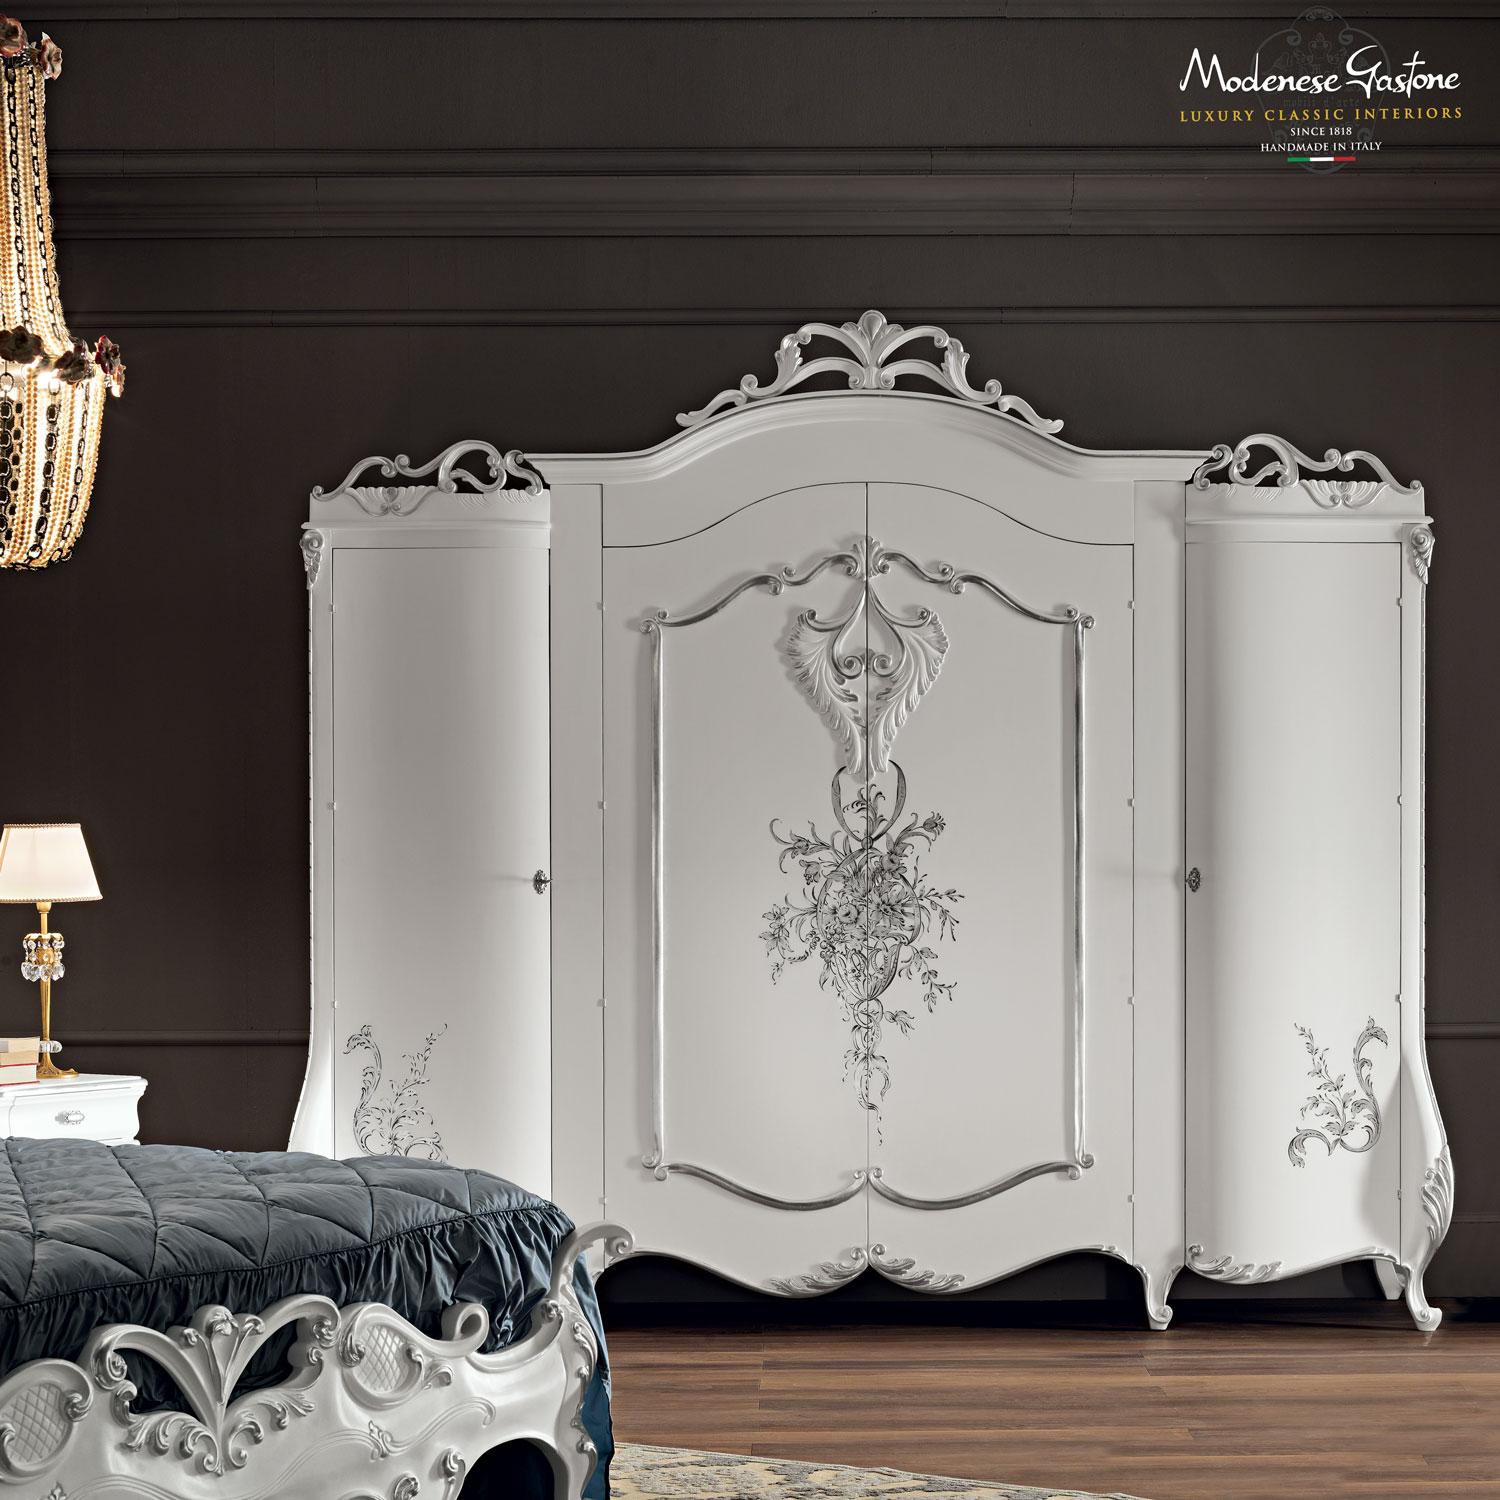 Gorgeous, handcarved baroque-inspired four doors white wardrobe by Italian producer Modenese Luxury Interiors. Features awe-inspiring handpainted floral decorations, and silver leaf applications on the carved ornamental elements. Best solution for